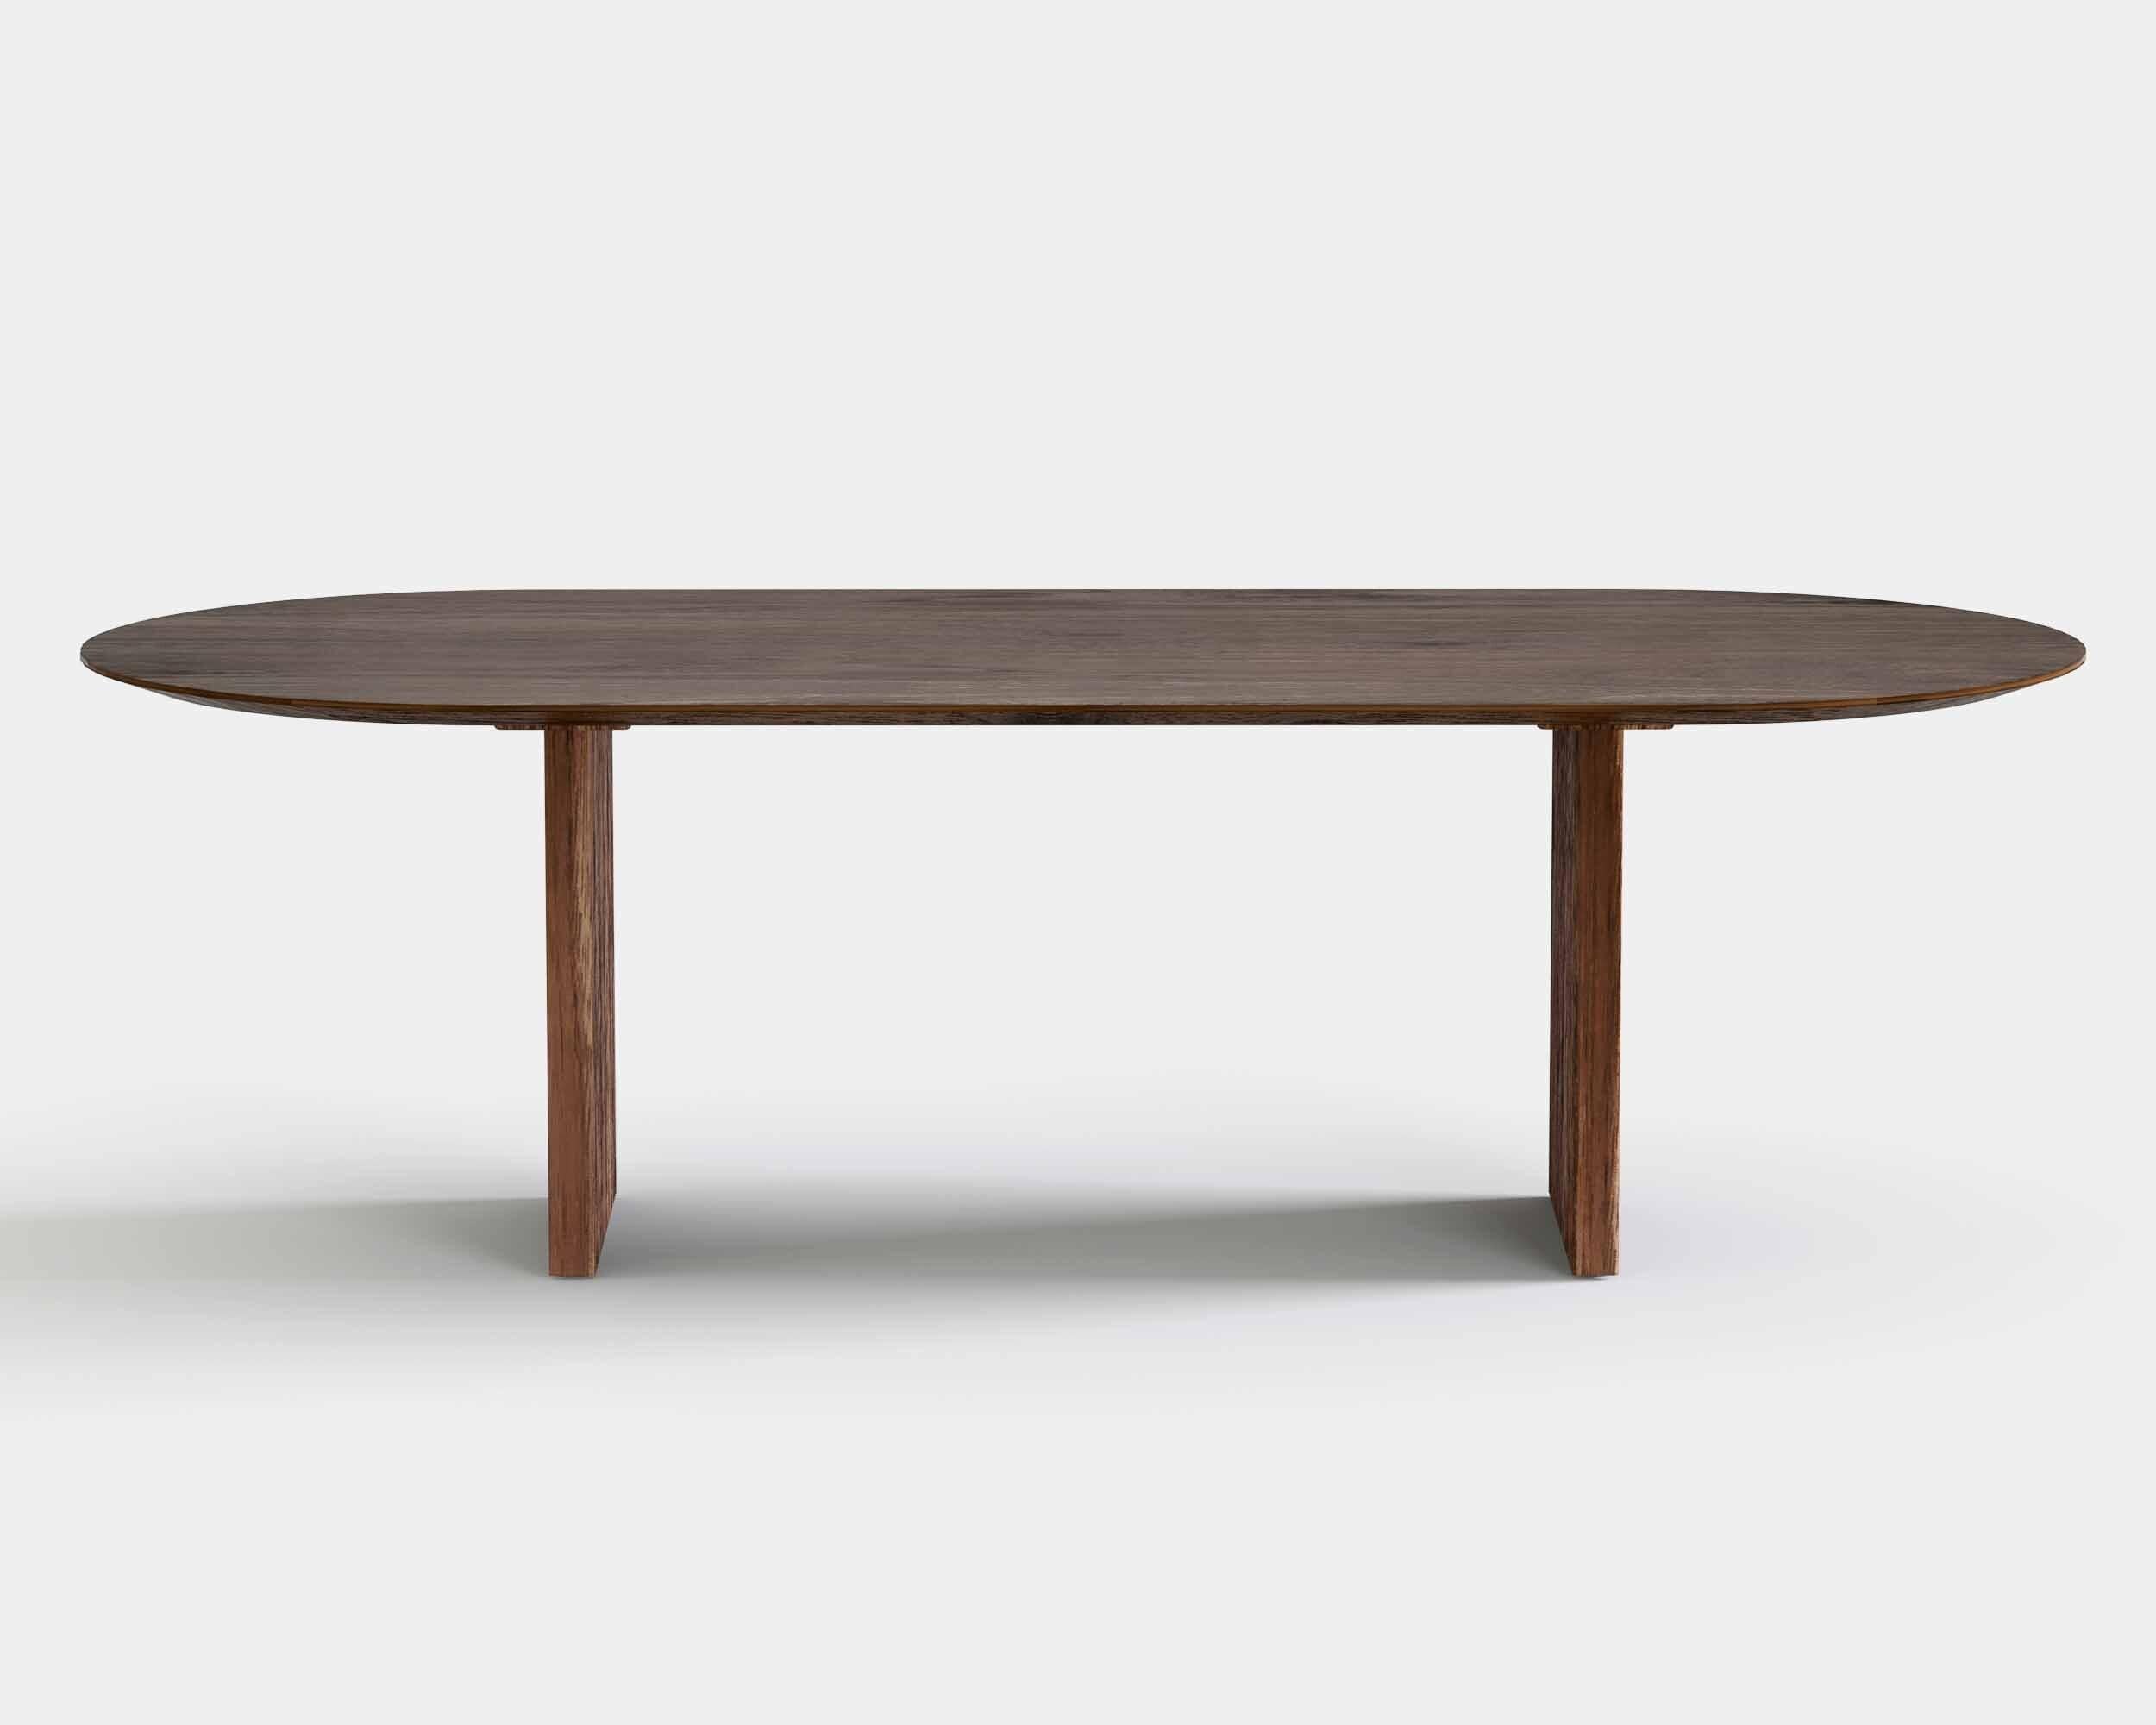 Ten dining table, oval, 300 cm.
Solid wood table top and legs. Handmade in Denmark. 

Measures: Height: 72 or 74 cm

Table top dimensions:
– 200 x 95 cm
– 240 x 105 cm
– 270 x 105 cm
– 300 x 105 cm
– 340 x 105 cm
– 370 x 105 cm
– 400 x